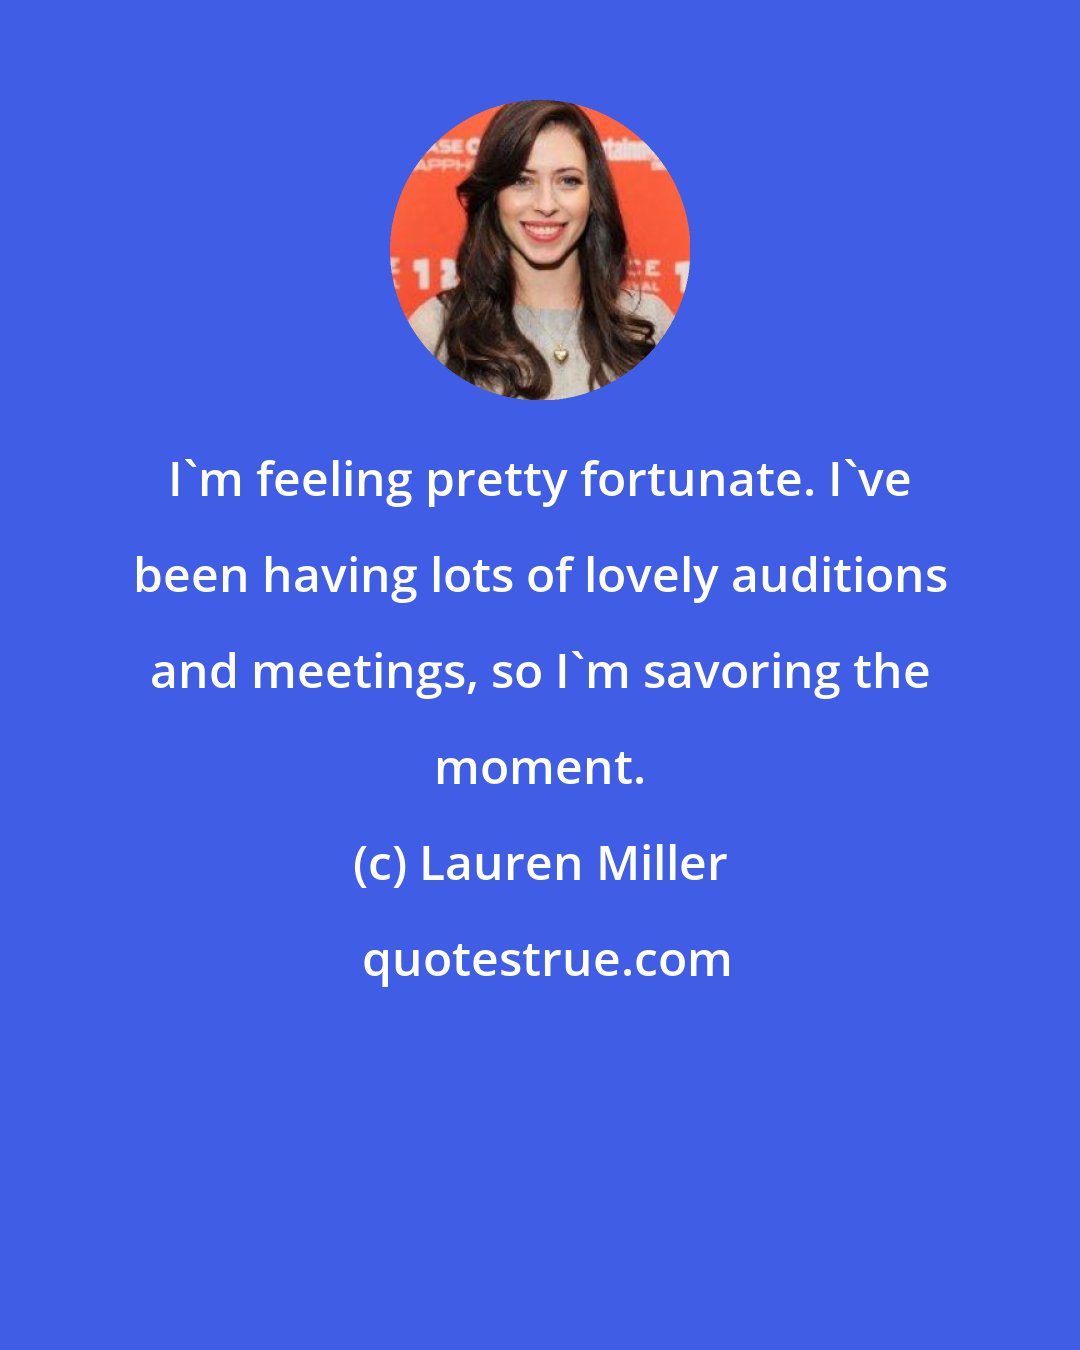 Lauren Miller: I'm feeling pretty fortunate. I've been having lots of lovely auditions and meetings, so I'm savoring the moment.